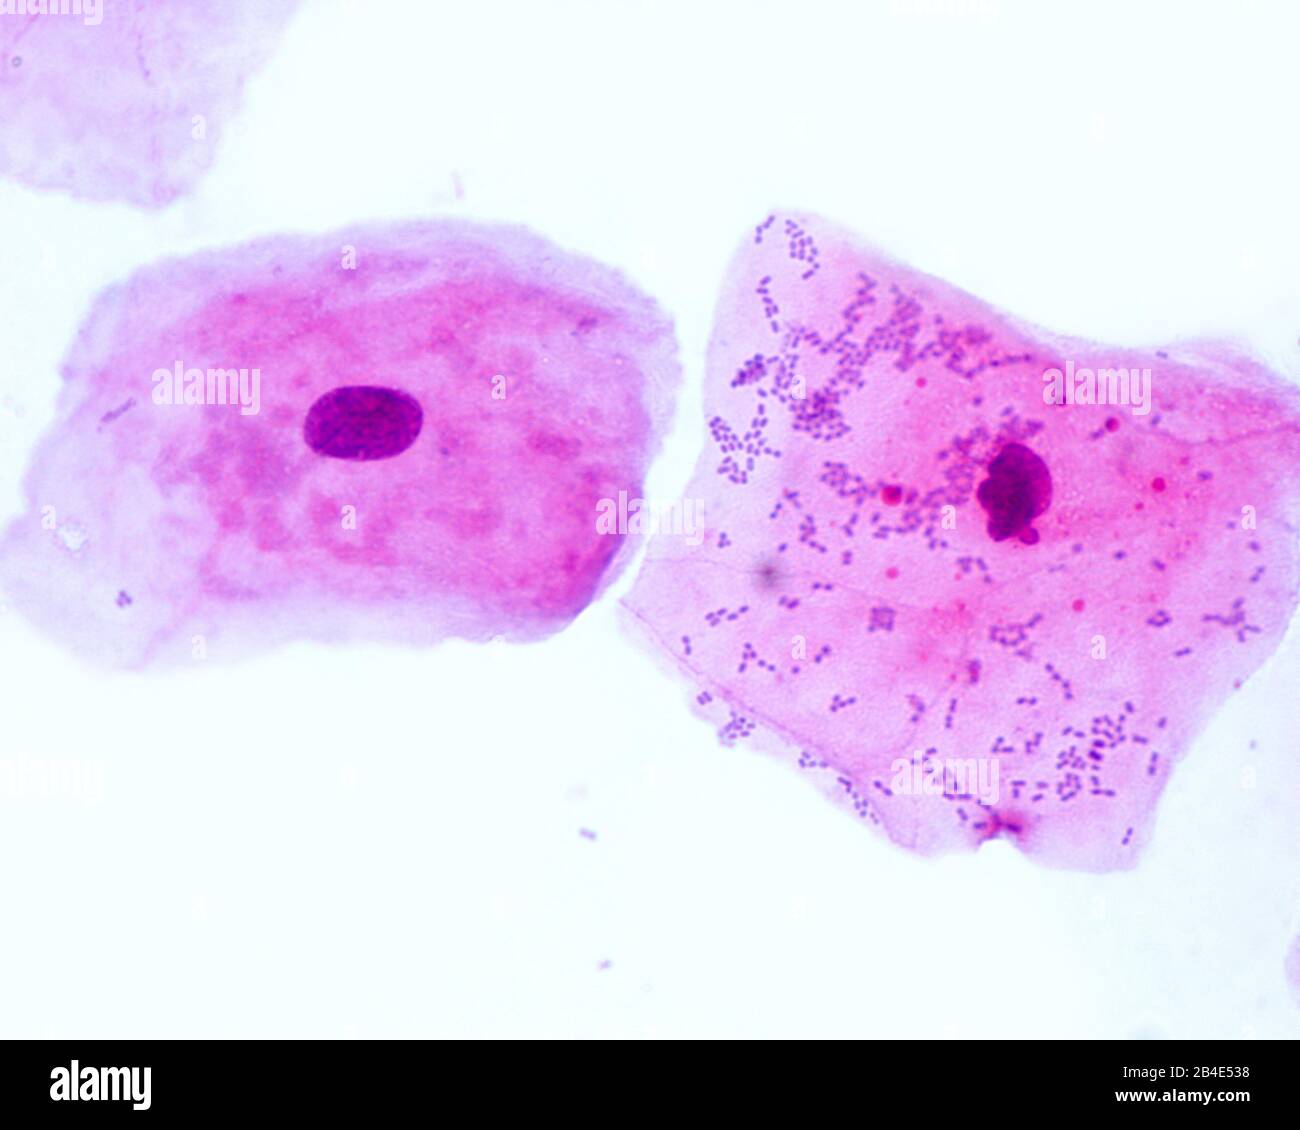 Buccal smear showing squamous epithelial cells exfoliated from the oral mucosae. Small blue dots located mainly on the right cell are bacteria. Stock Photo